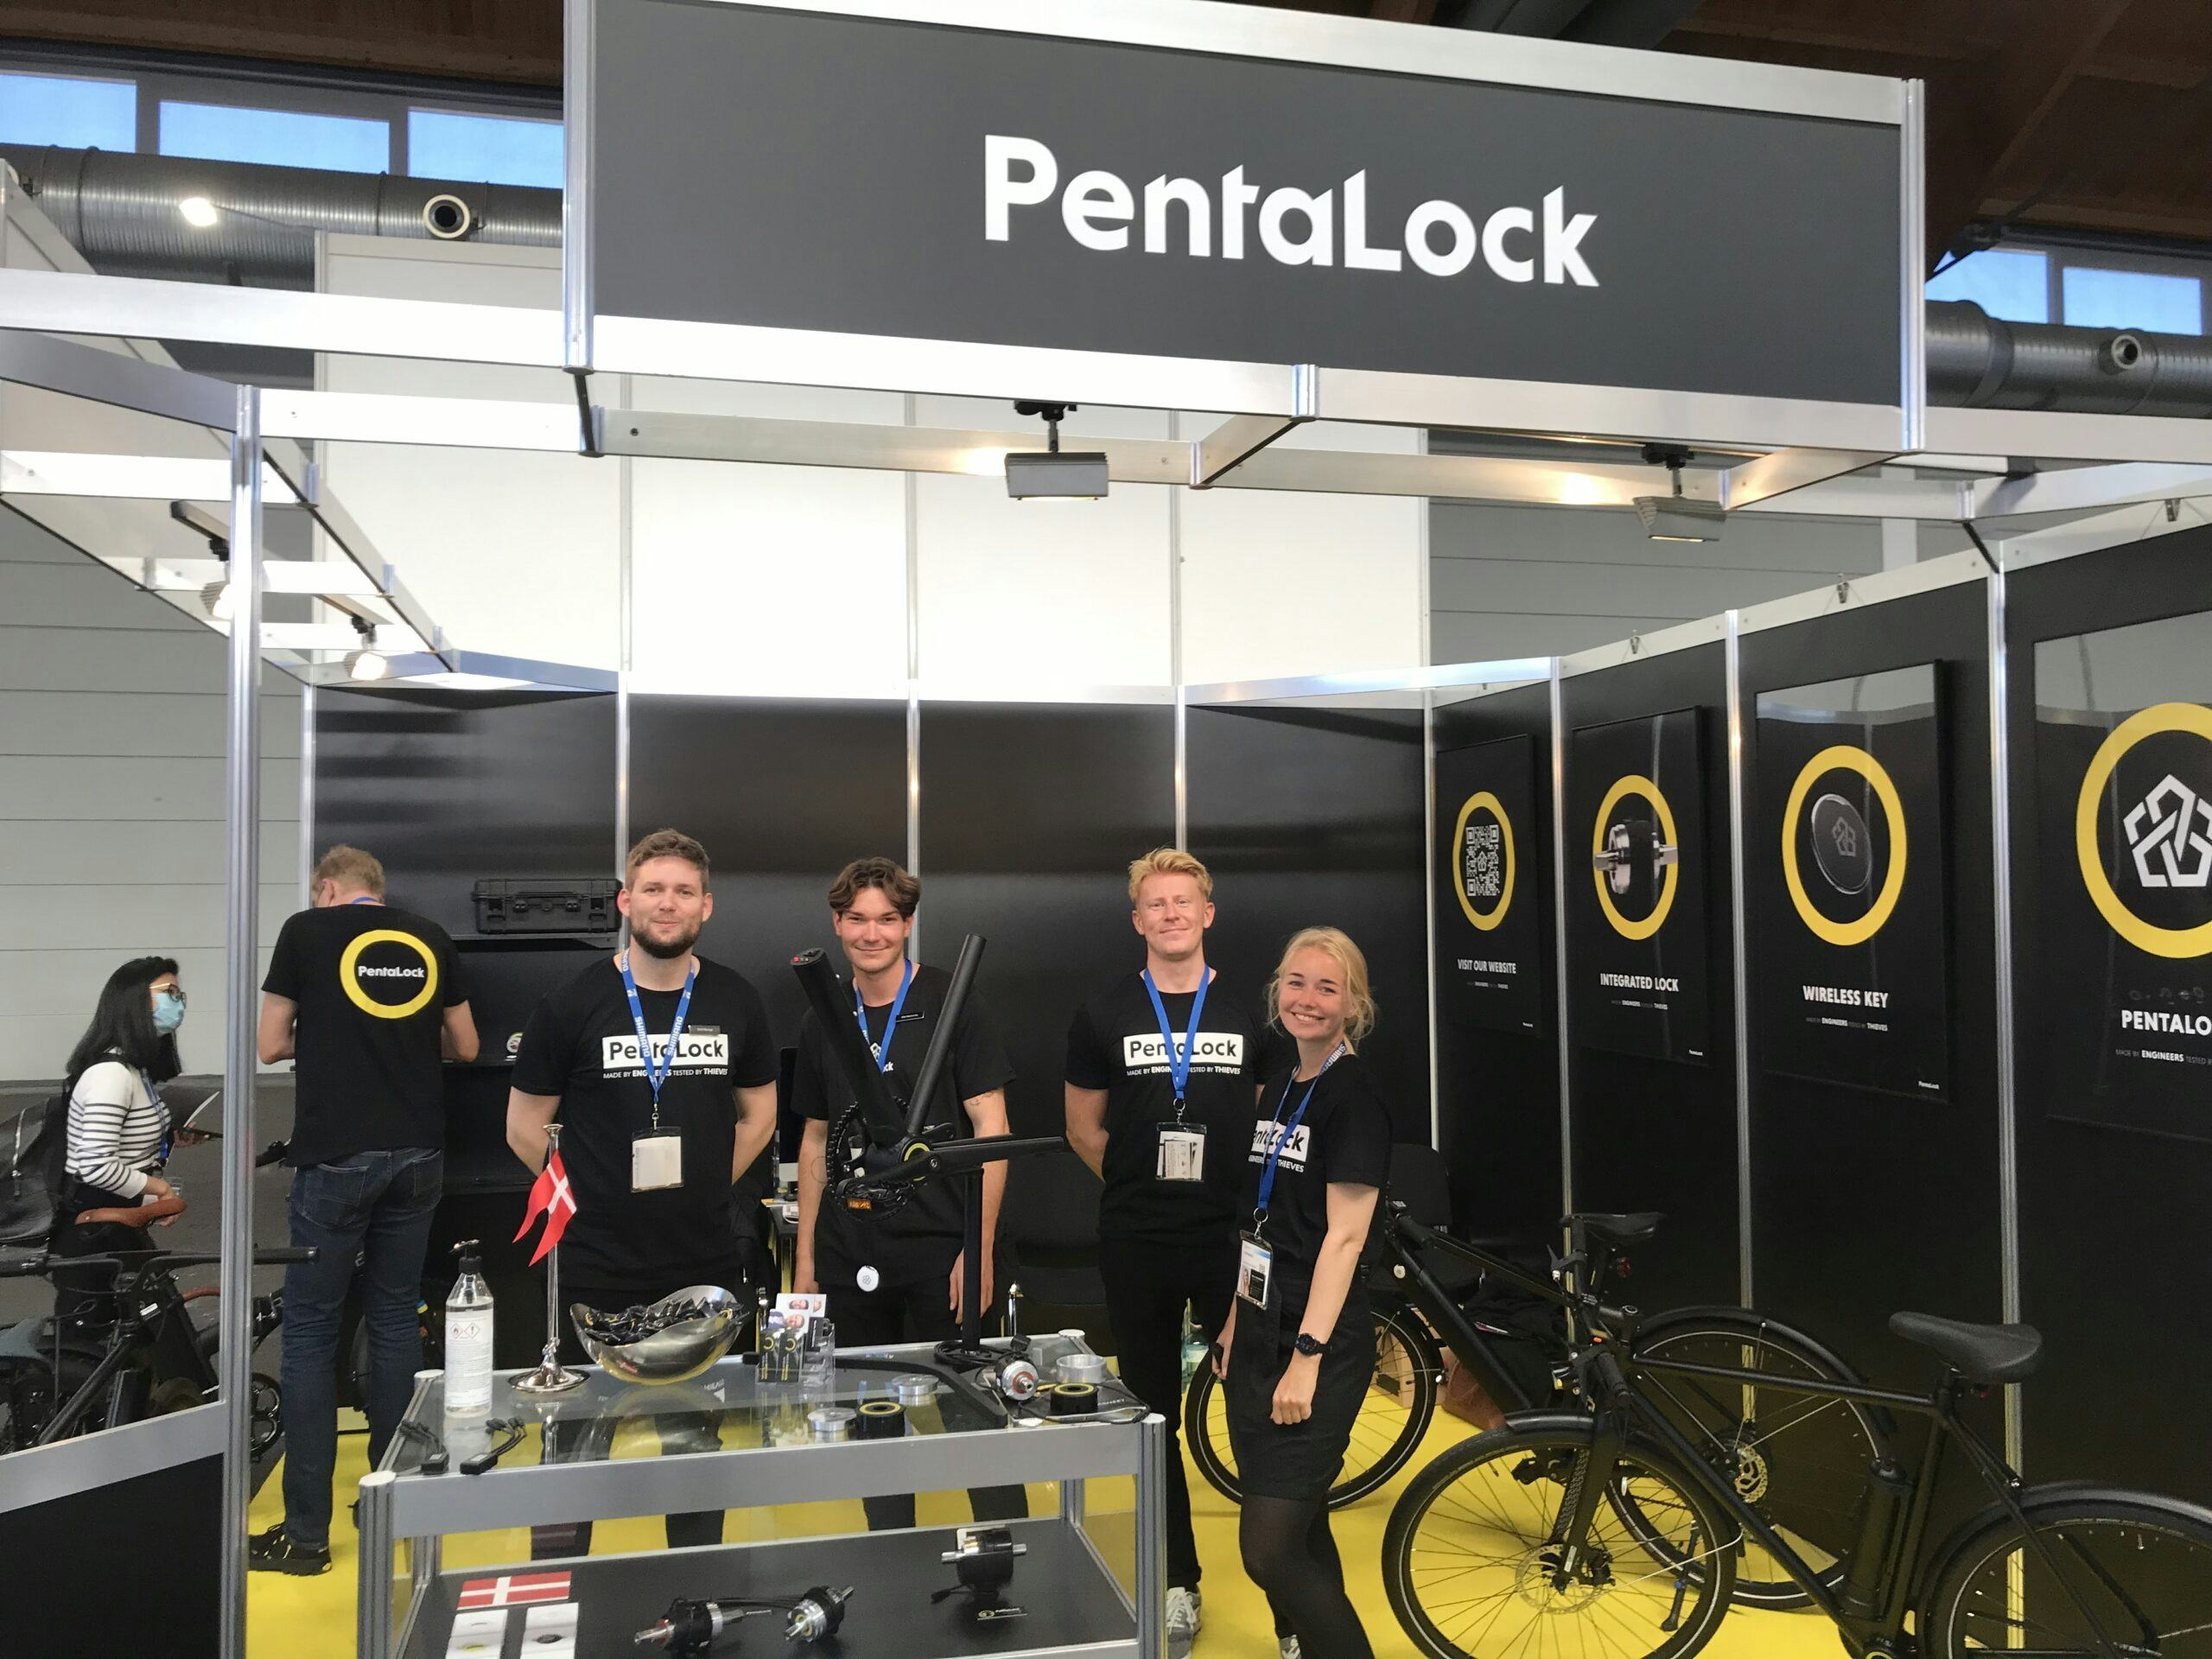 One of the highlights for PentaLock in 2021 was Eurobike. 